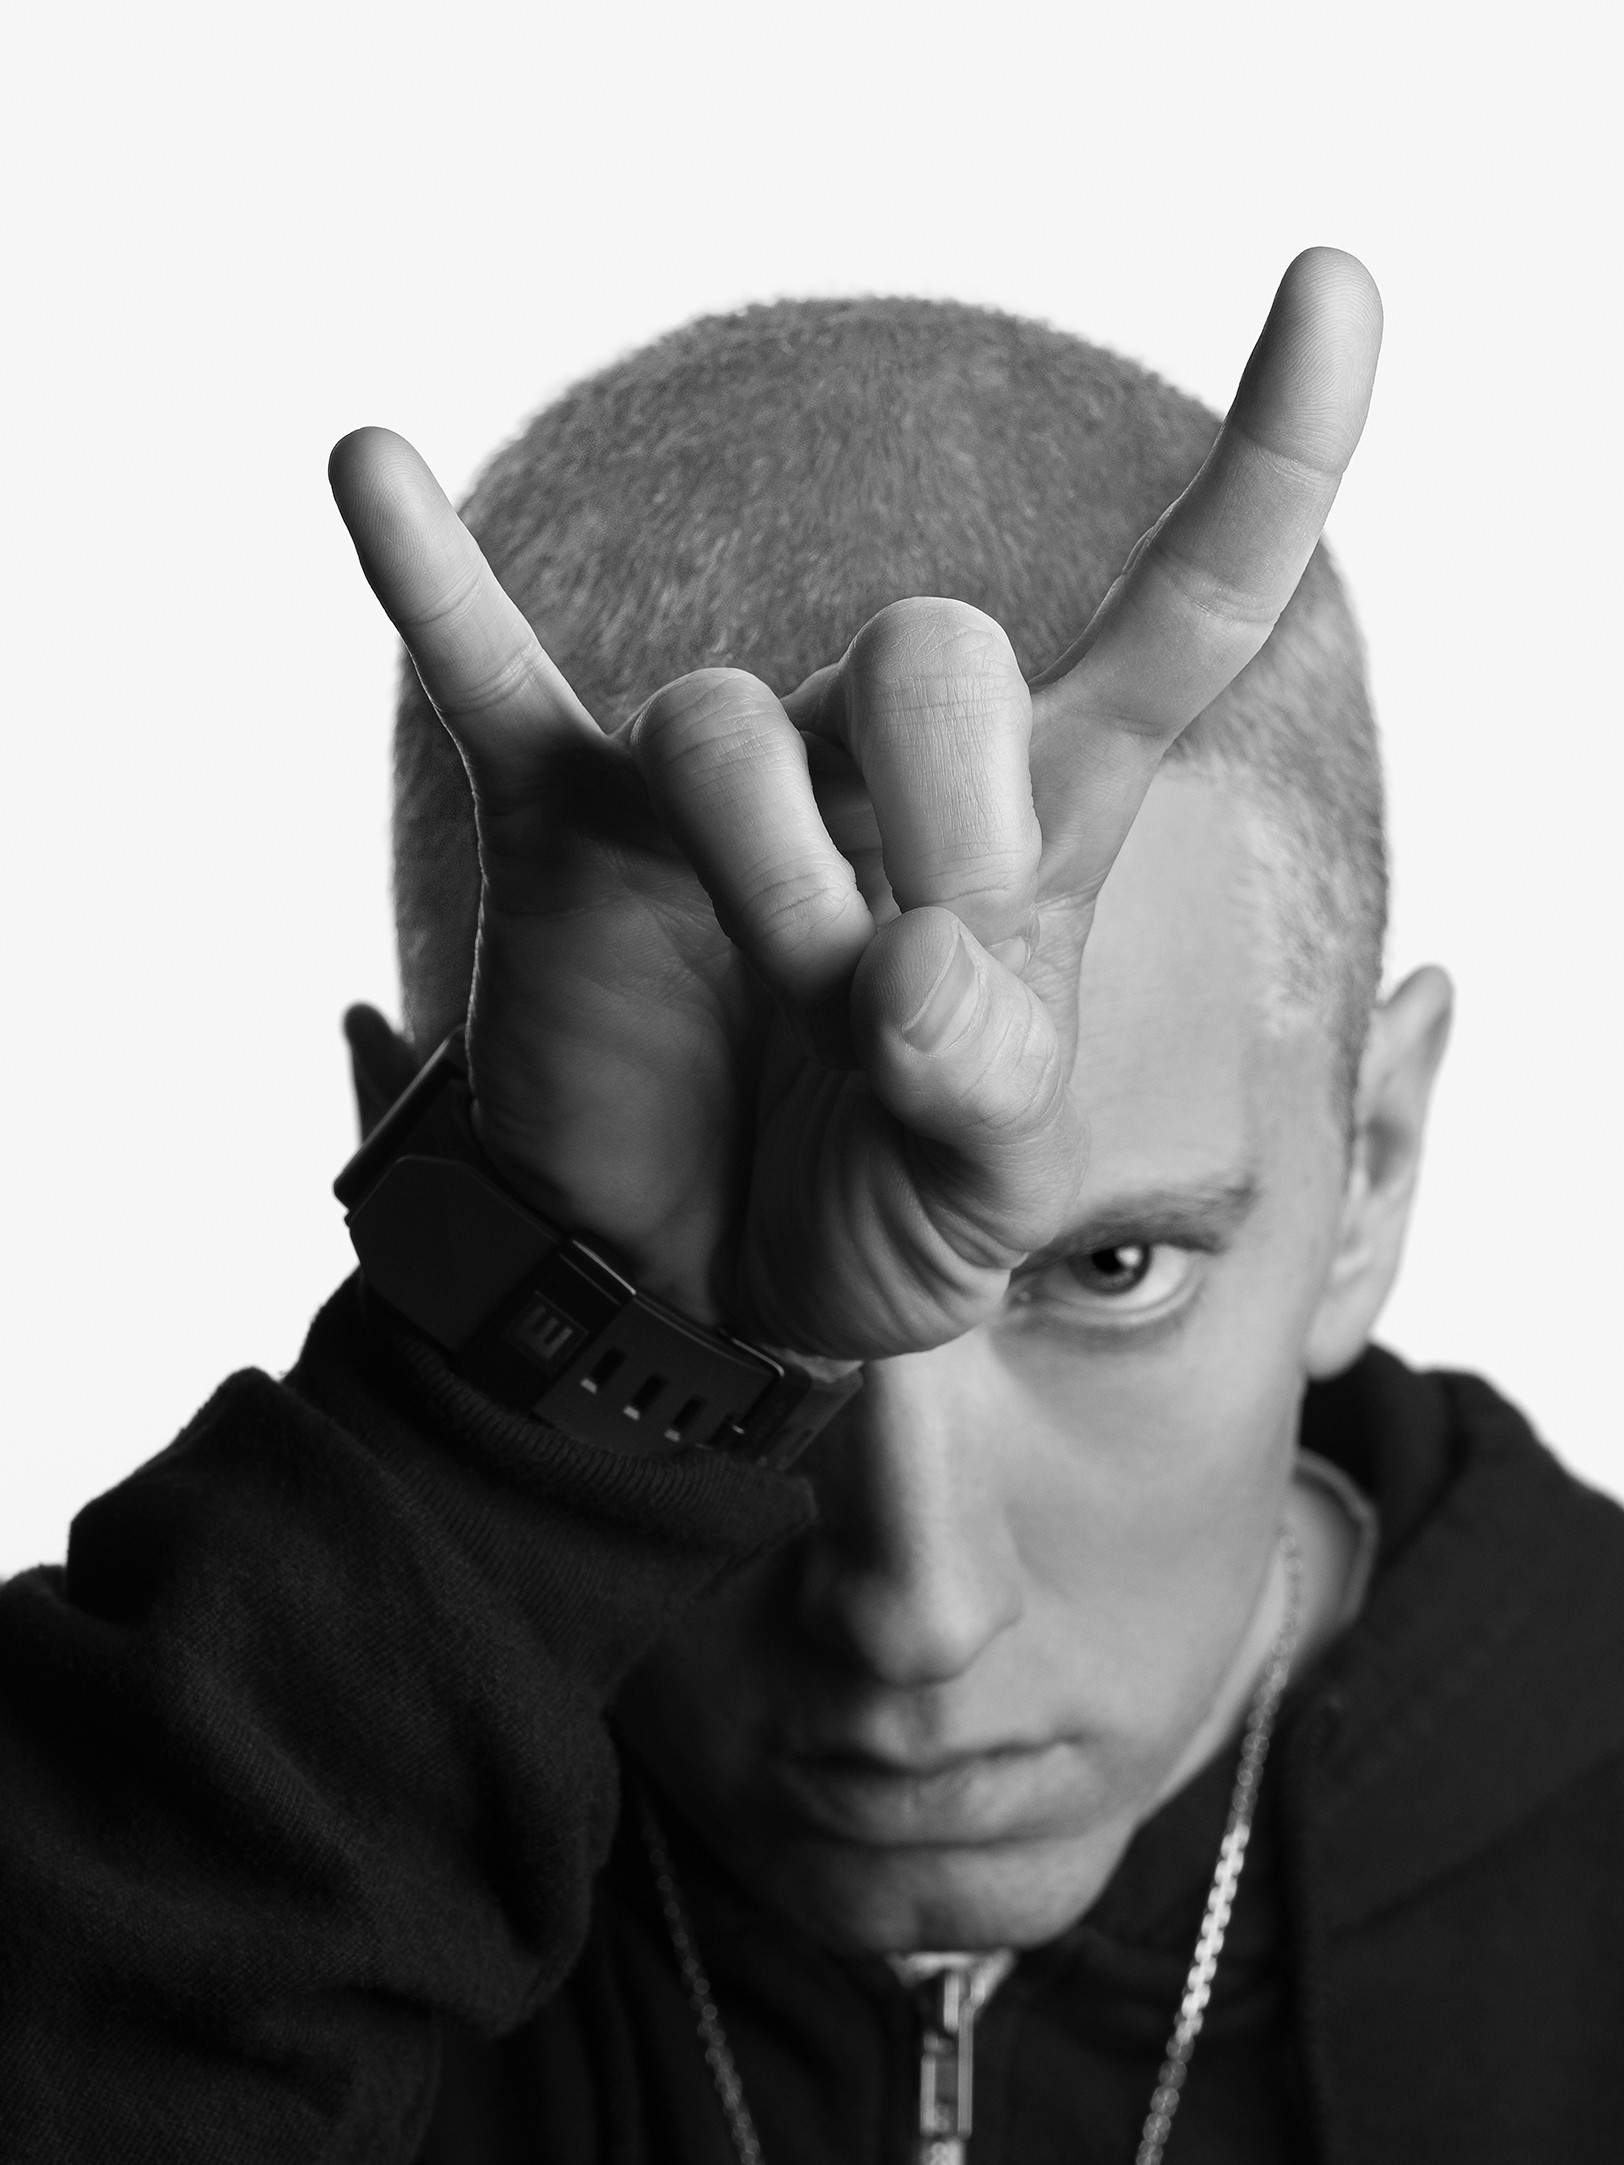 Eminem to Release 'The Marshall Mathers LP 2' on Nov. 5